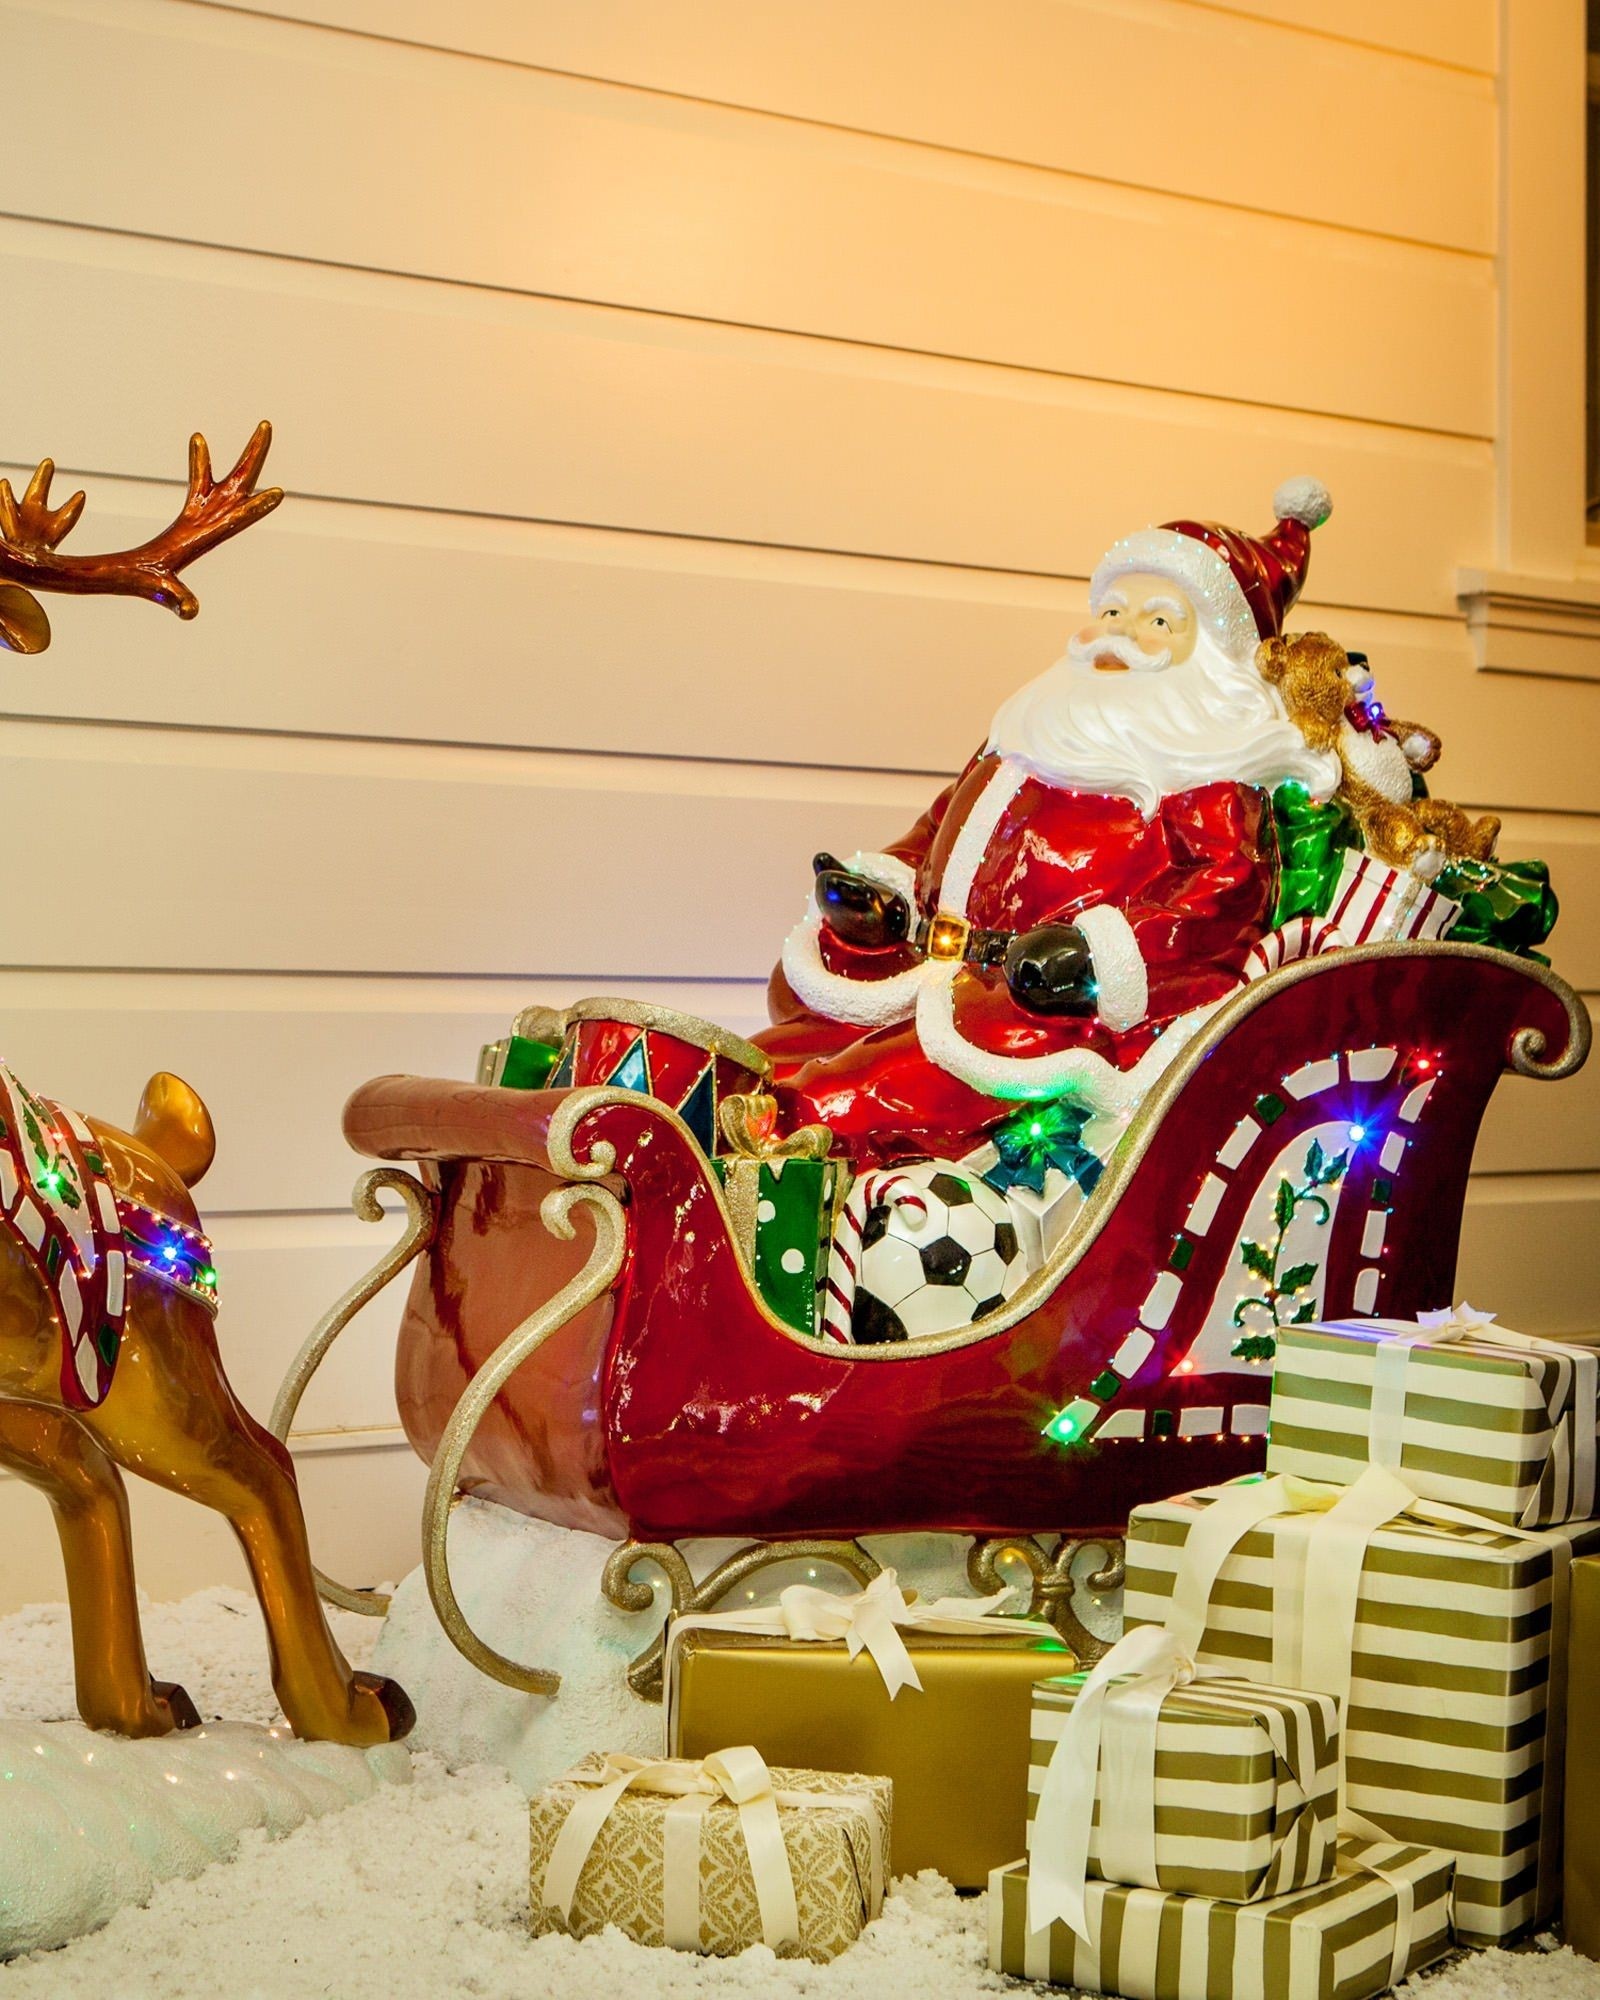 Santa and sleigh with reindeer outdoor decorations